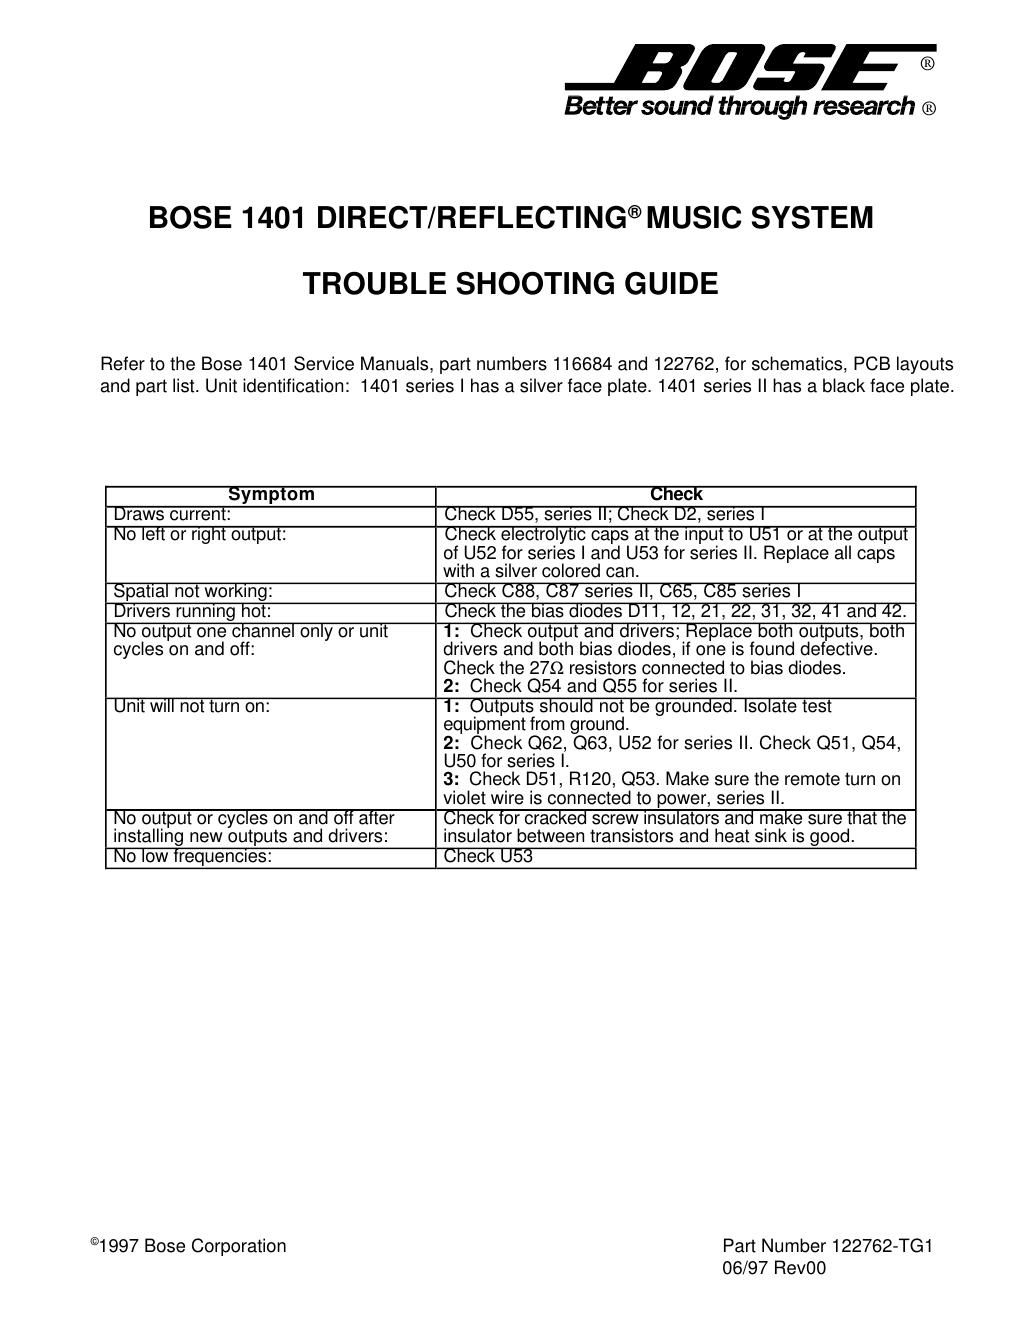 bose 1401 trouble shooting guide